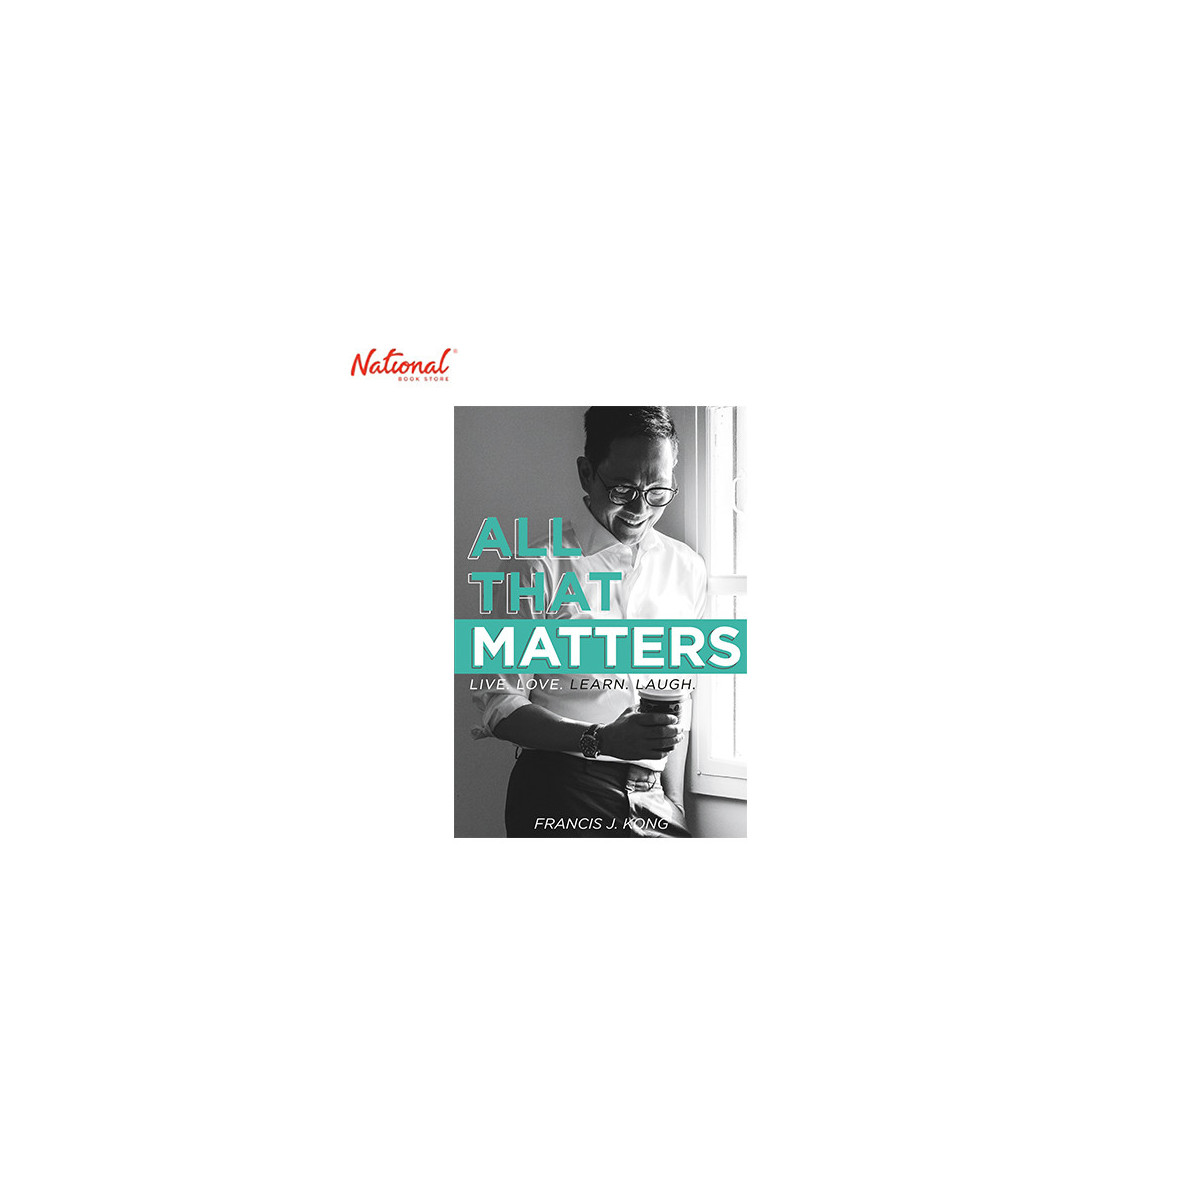 ALL THAT MATTERS TRADE PAPERBACK